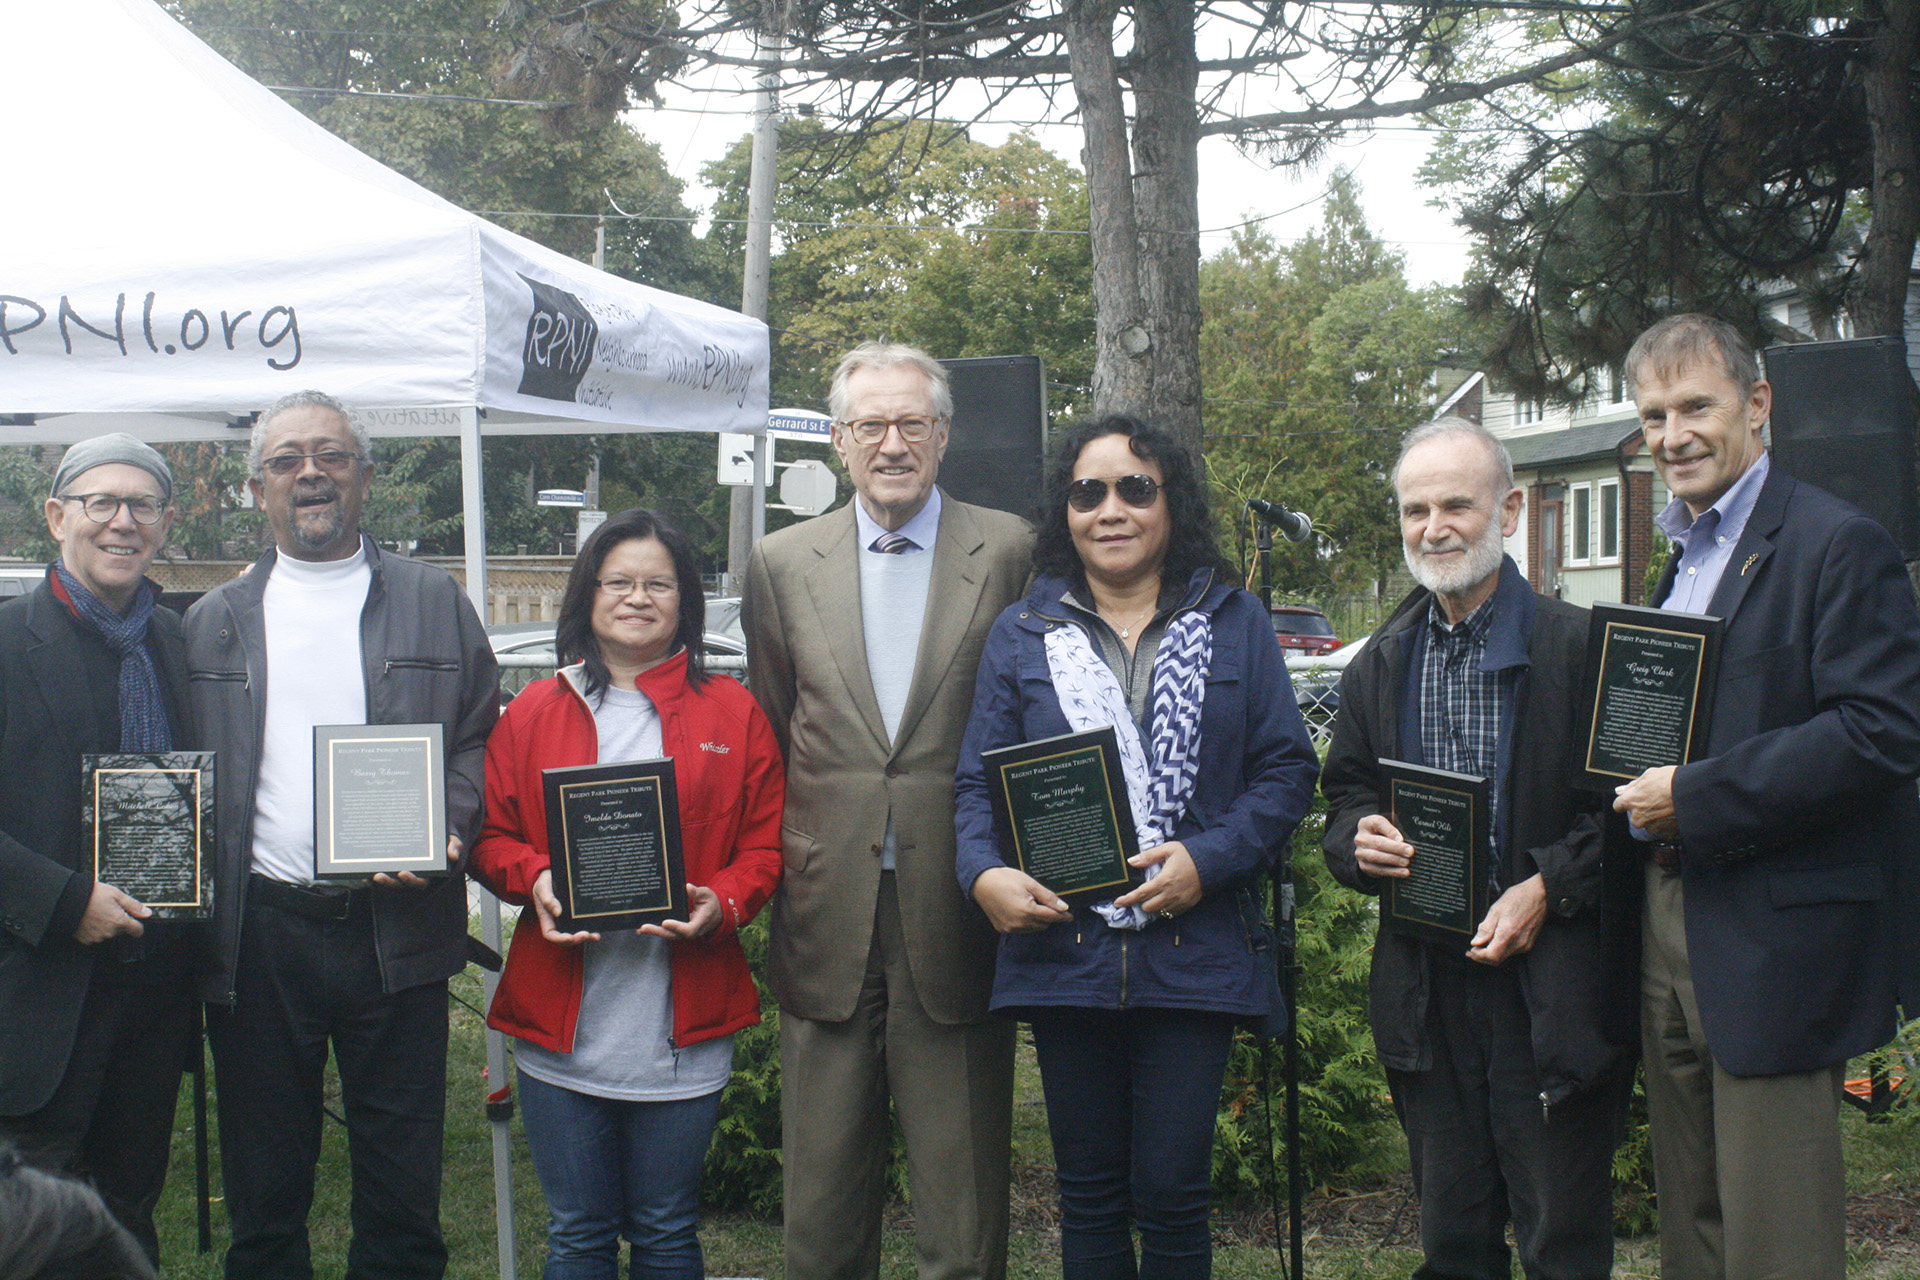 Senator Art Eggleton, centre, with citizen activists who pioneered the Regent Park Revitalization project in Toronto in 2011.